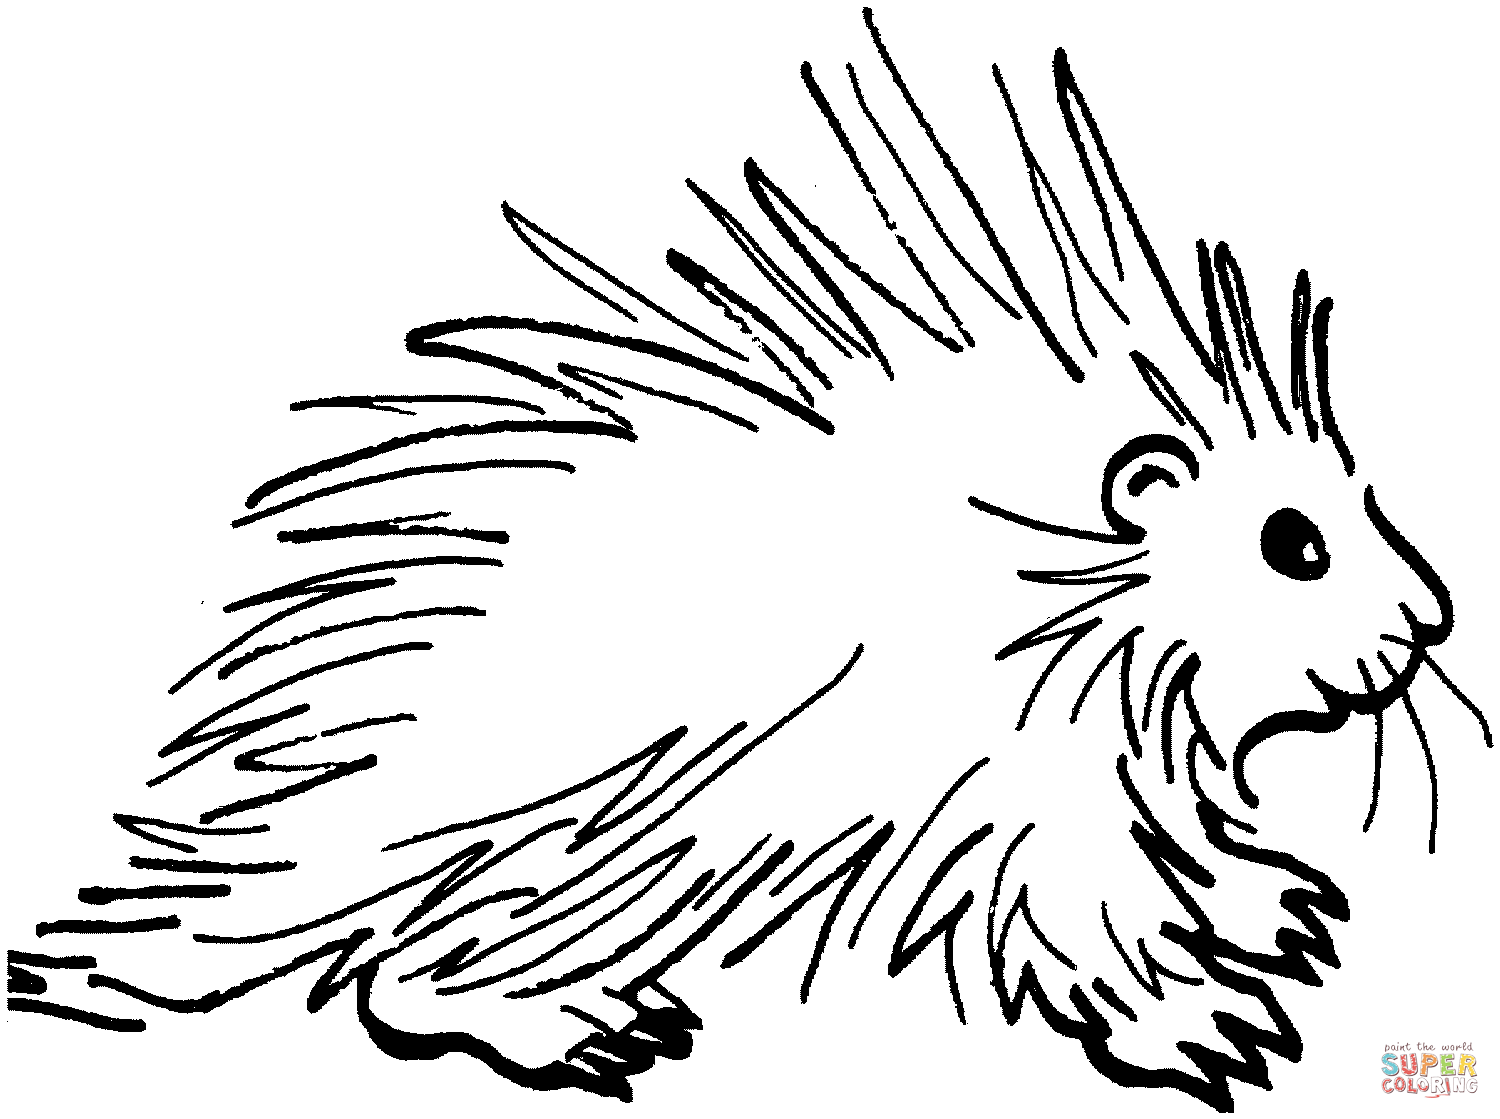 Porcupine coloring #18, Download drawings